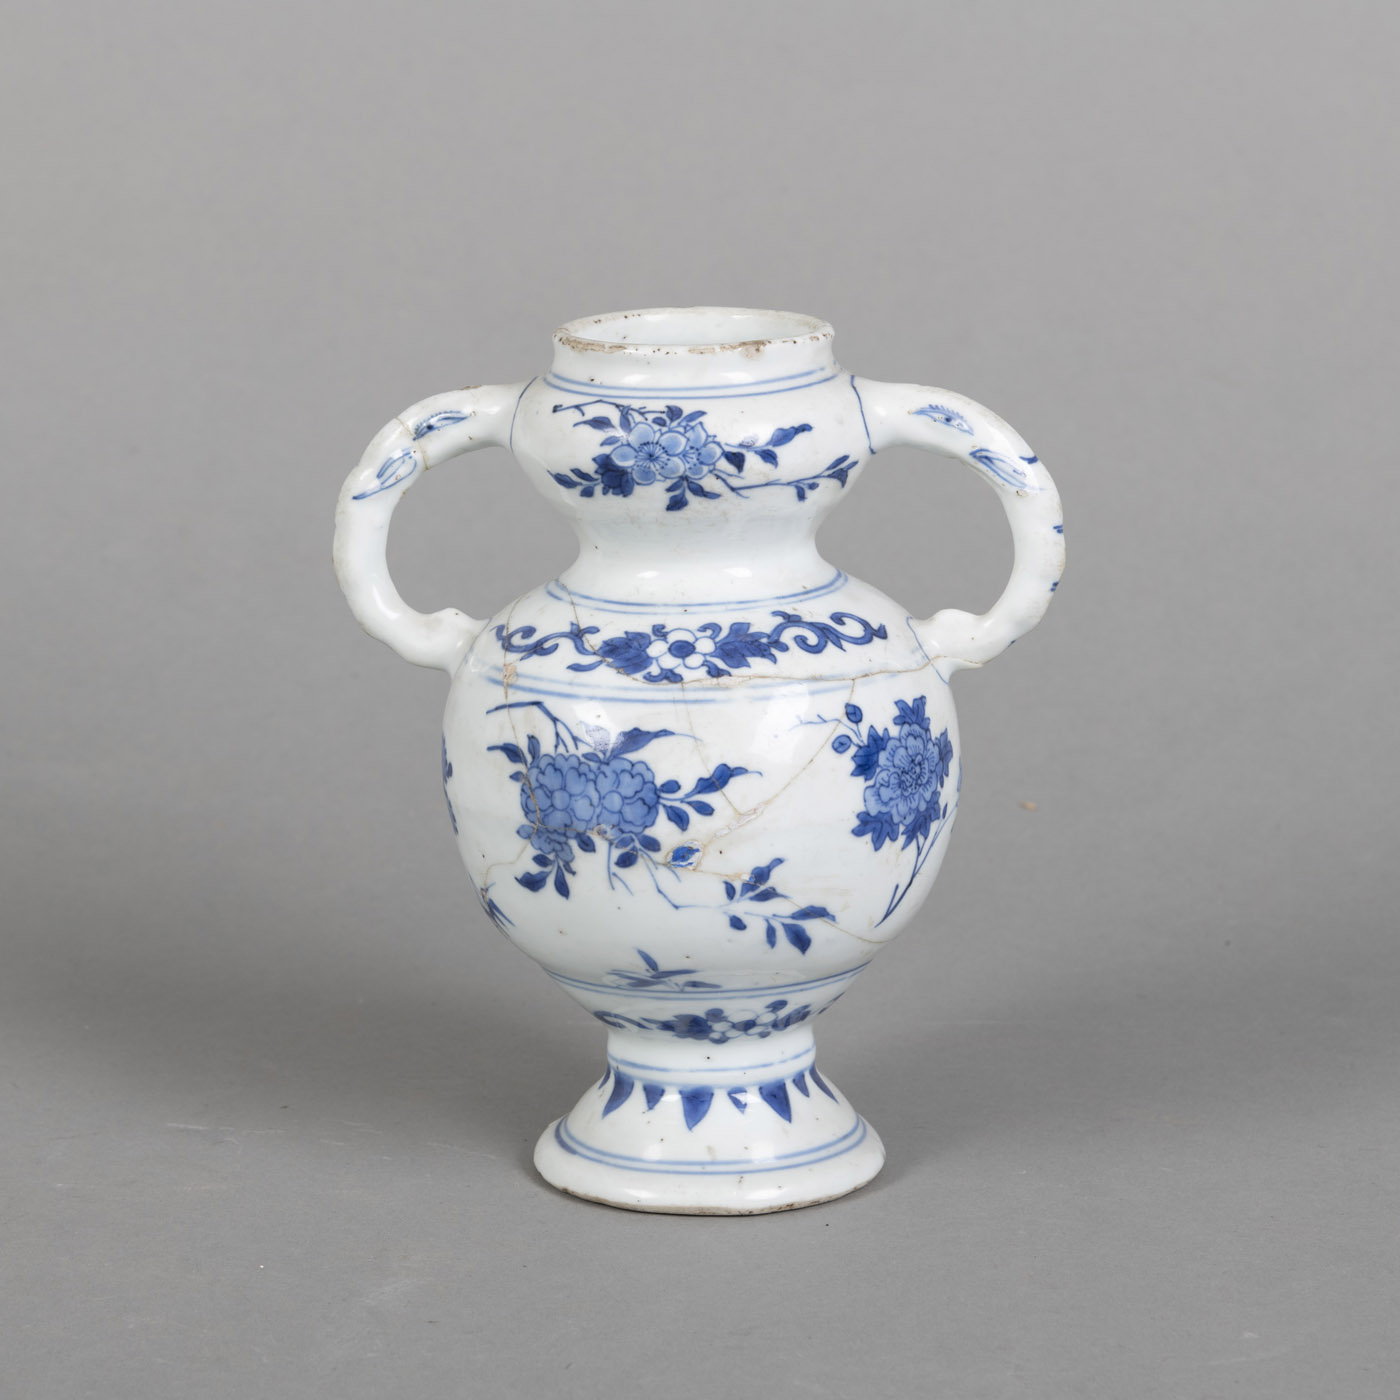 <b>A BLUE AND WHITE VASE WITH TWO HANDLES AND FLOWER BRANCHES DECORATIONS</b>